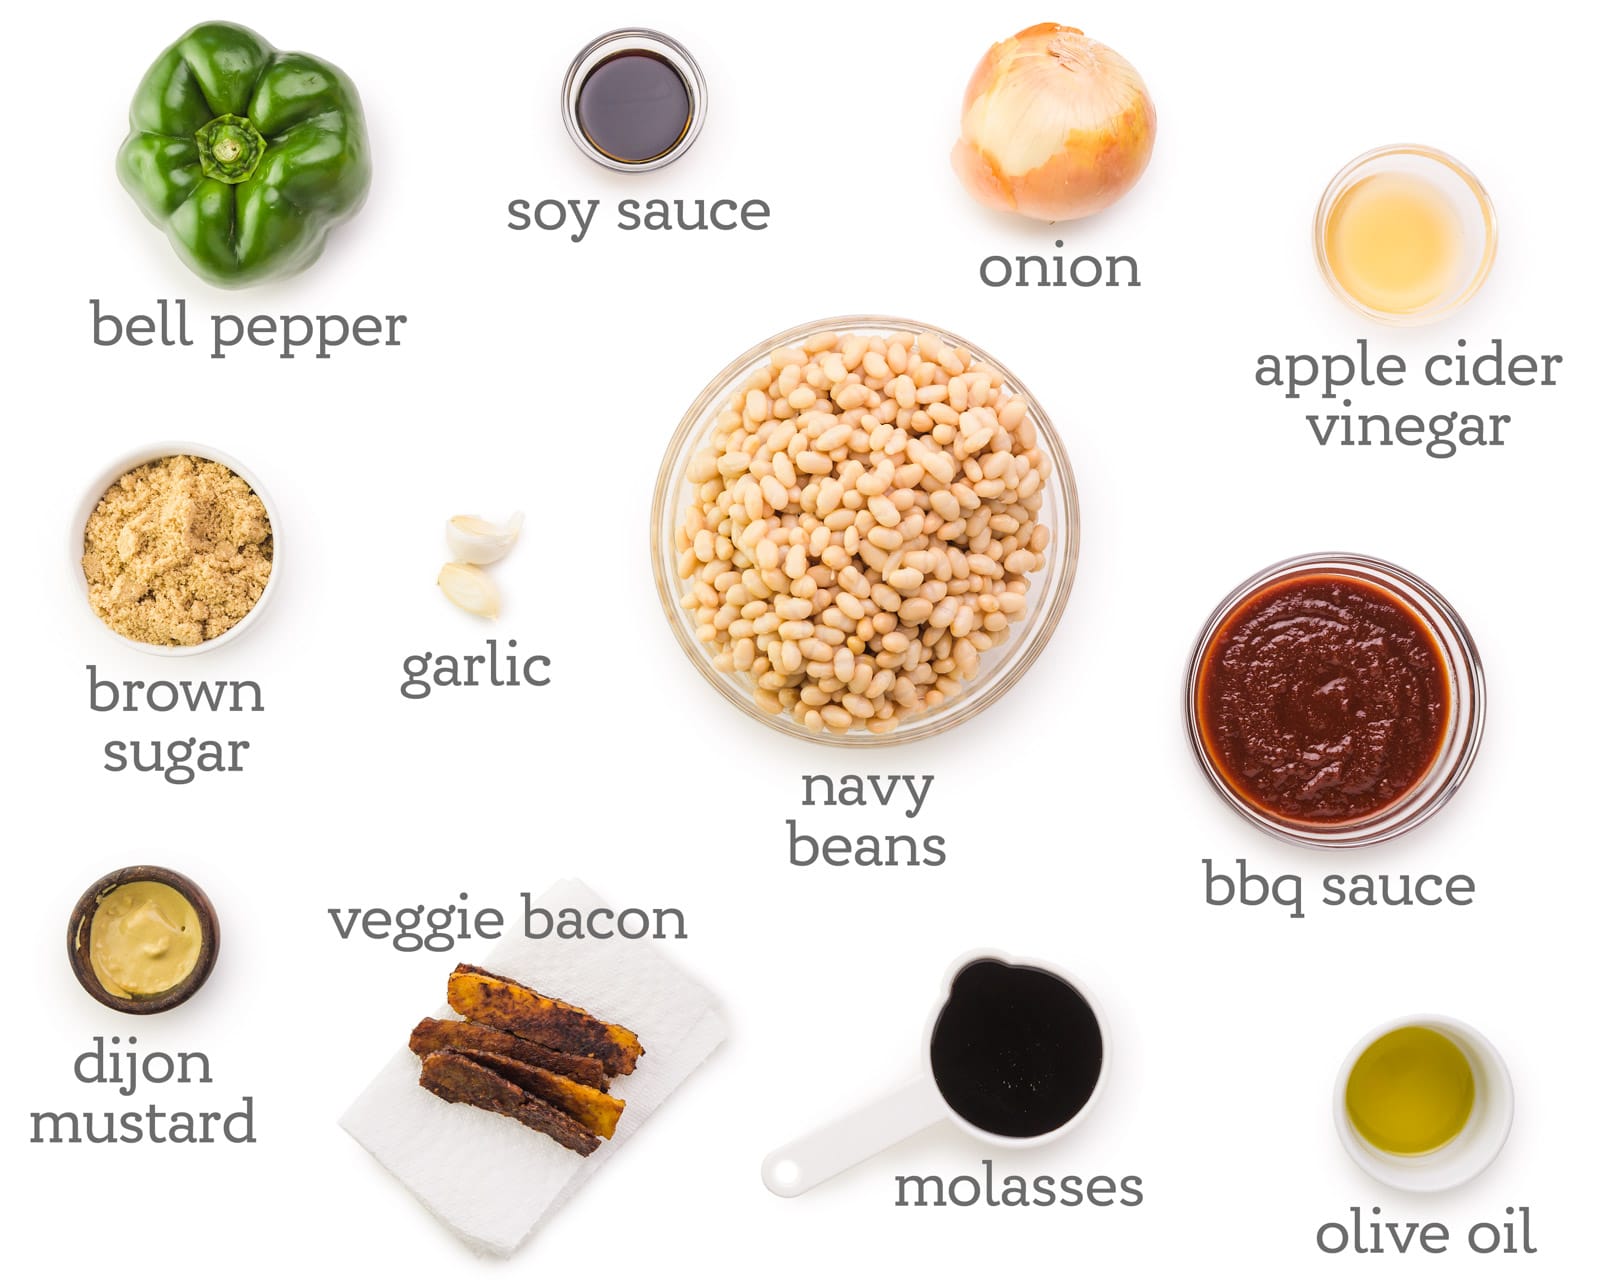 Ingredients are laid out on a table. The labels next to them read, onion, apple cider vinegar, bbq sauce, olive oil, molasses, navy beans, veggie bacon, dijon mustard, brown sugar, bell pepper, garlic, and soy sauce.